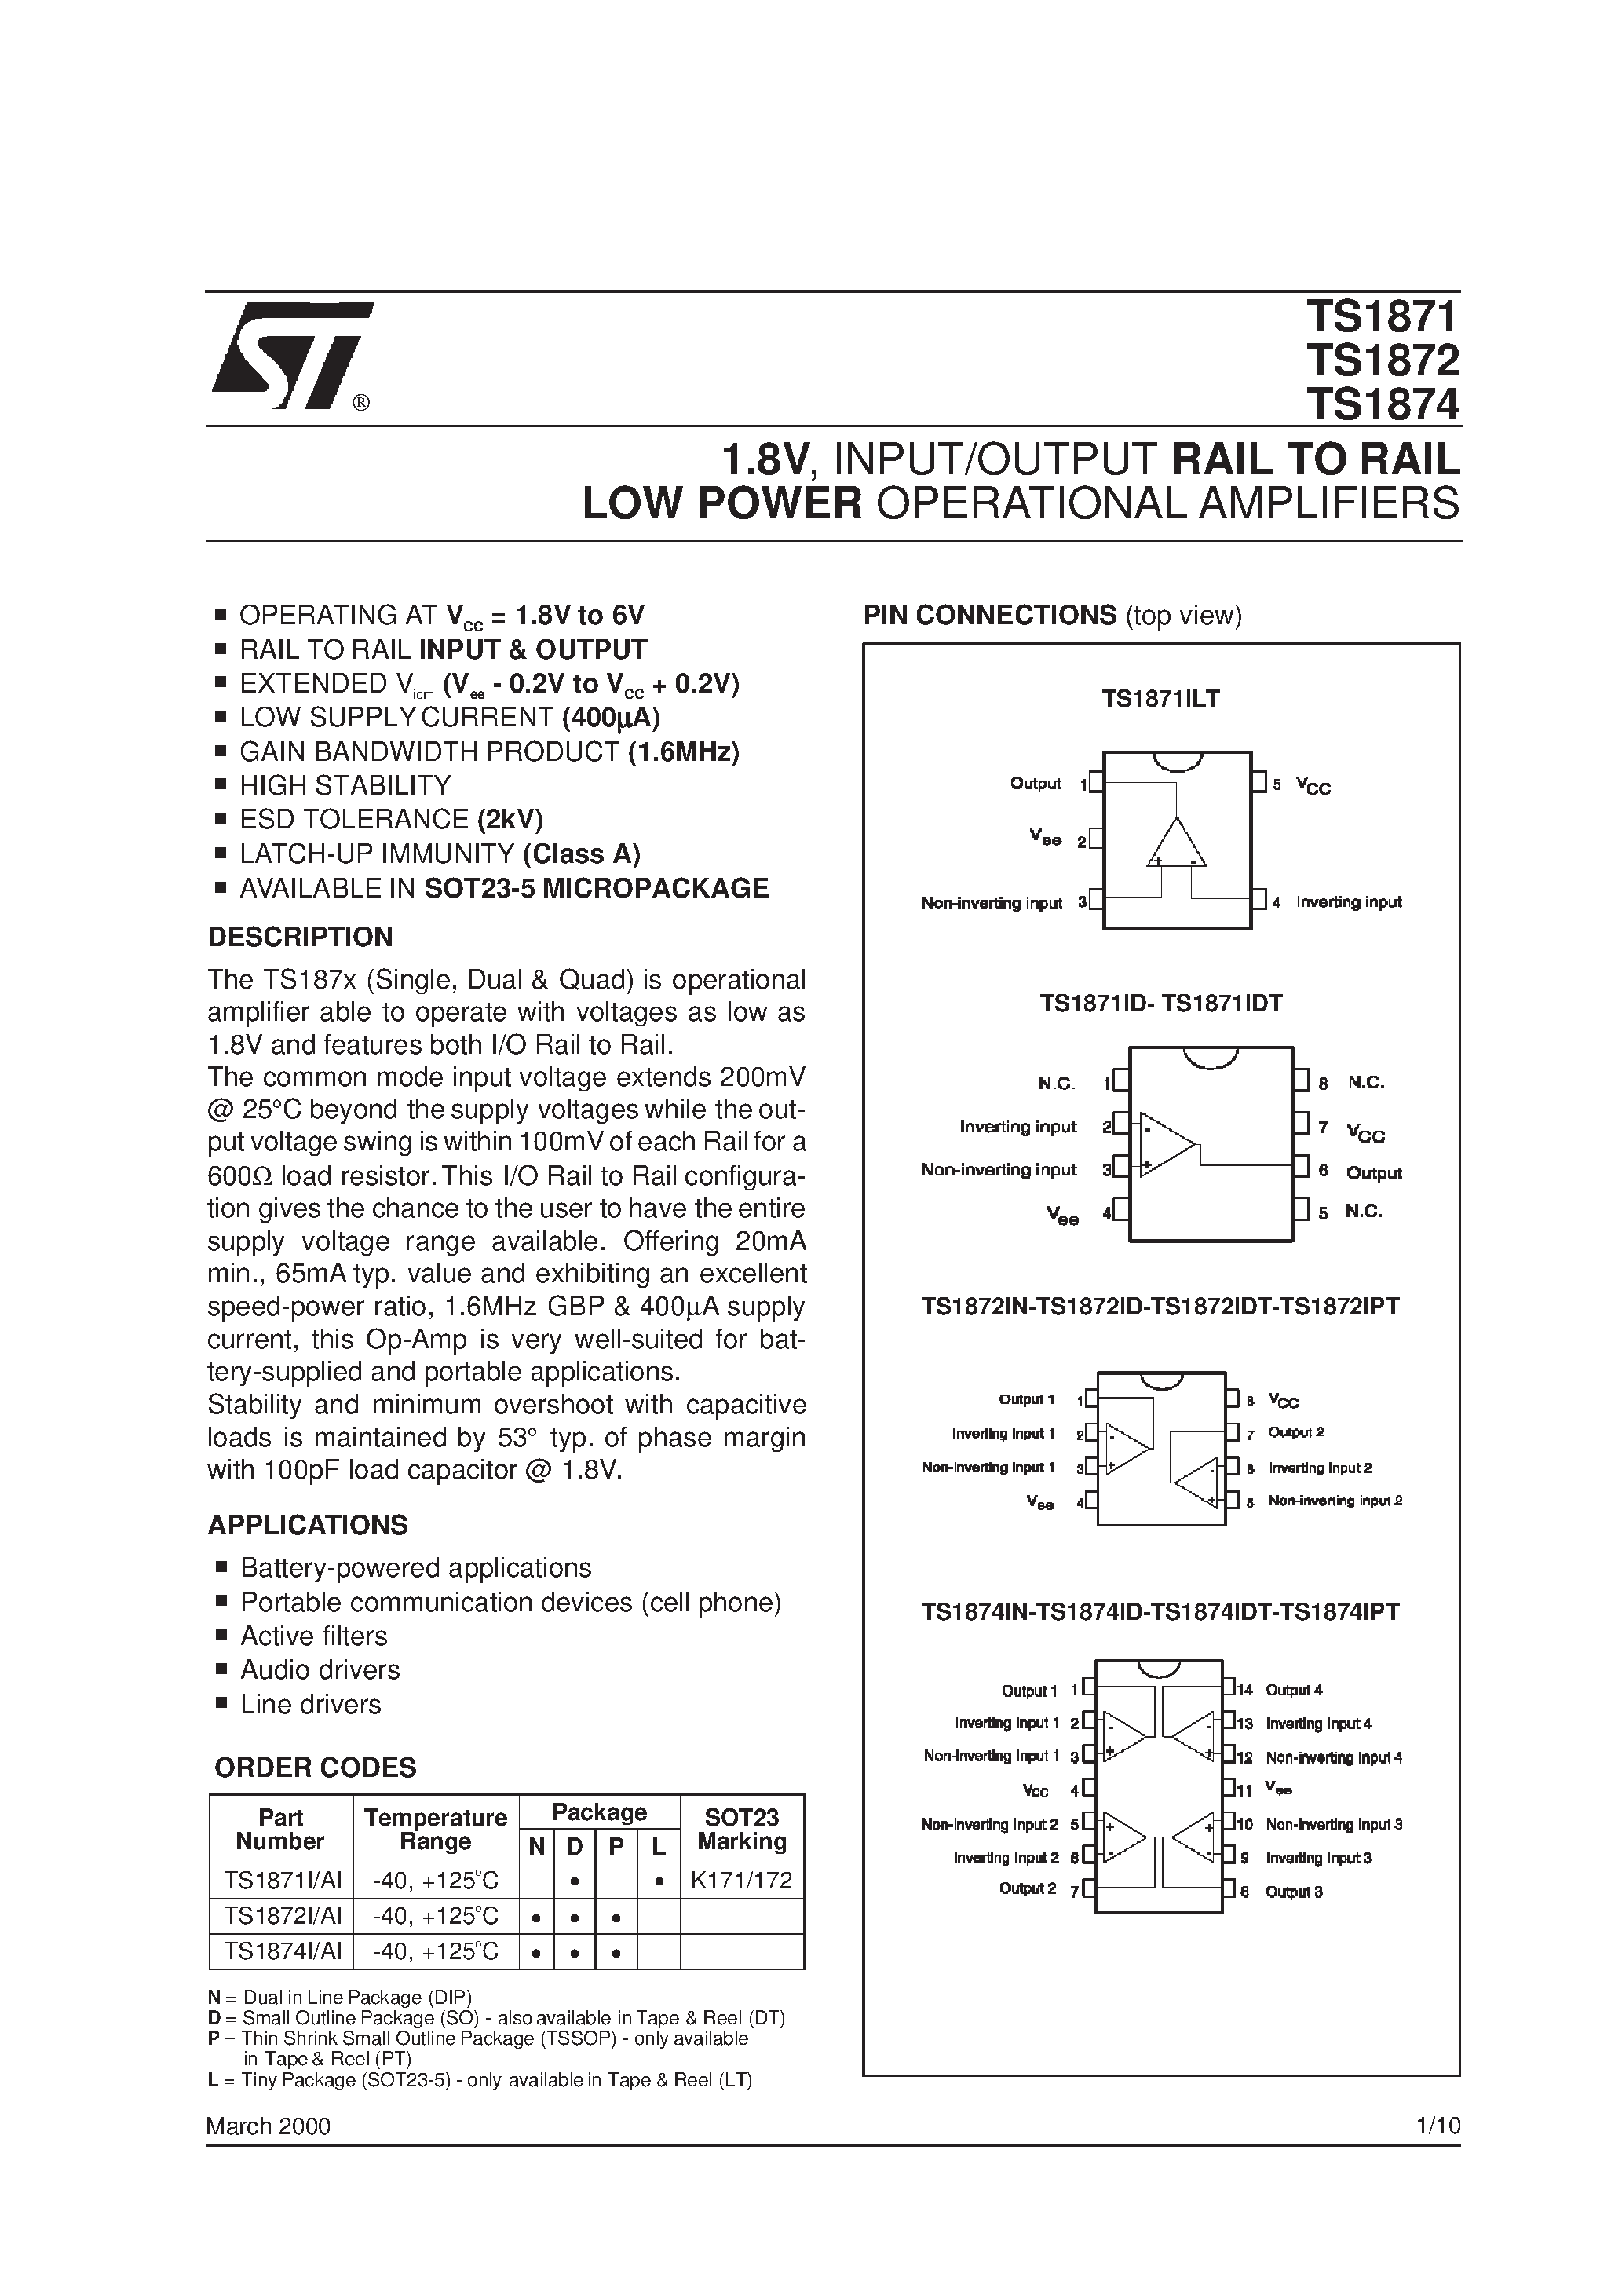 Datasheet TS1871 - 1.8V/ INPUT/OUTPUT RAIL TO RAIL LOW POWER OPERATIONAL AMPLIFIERS page 1